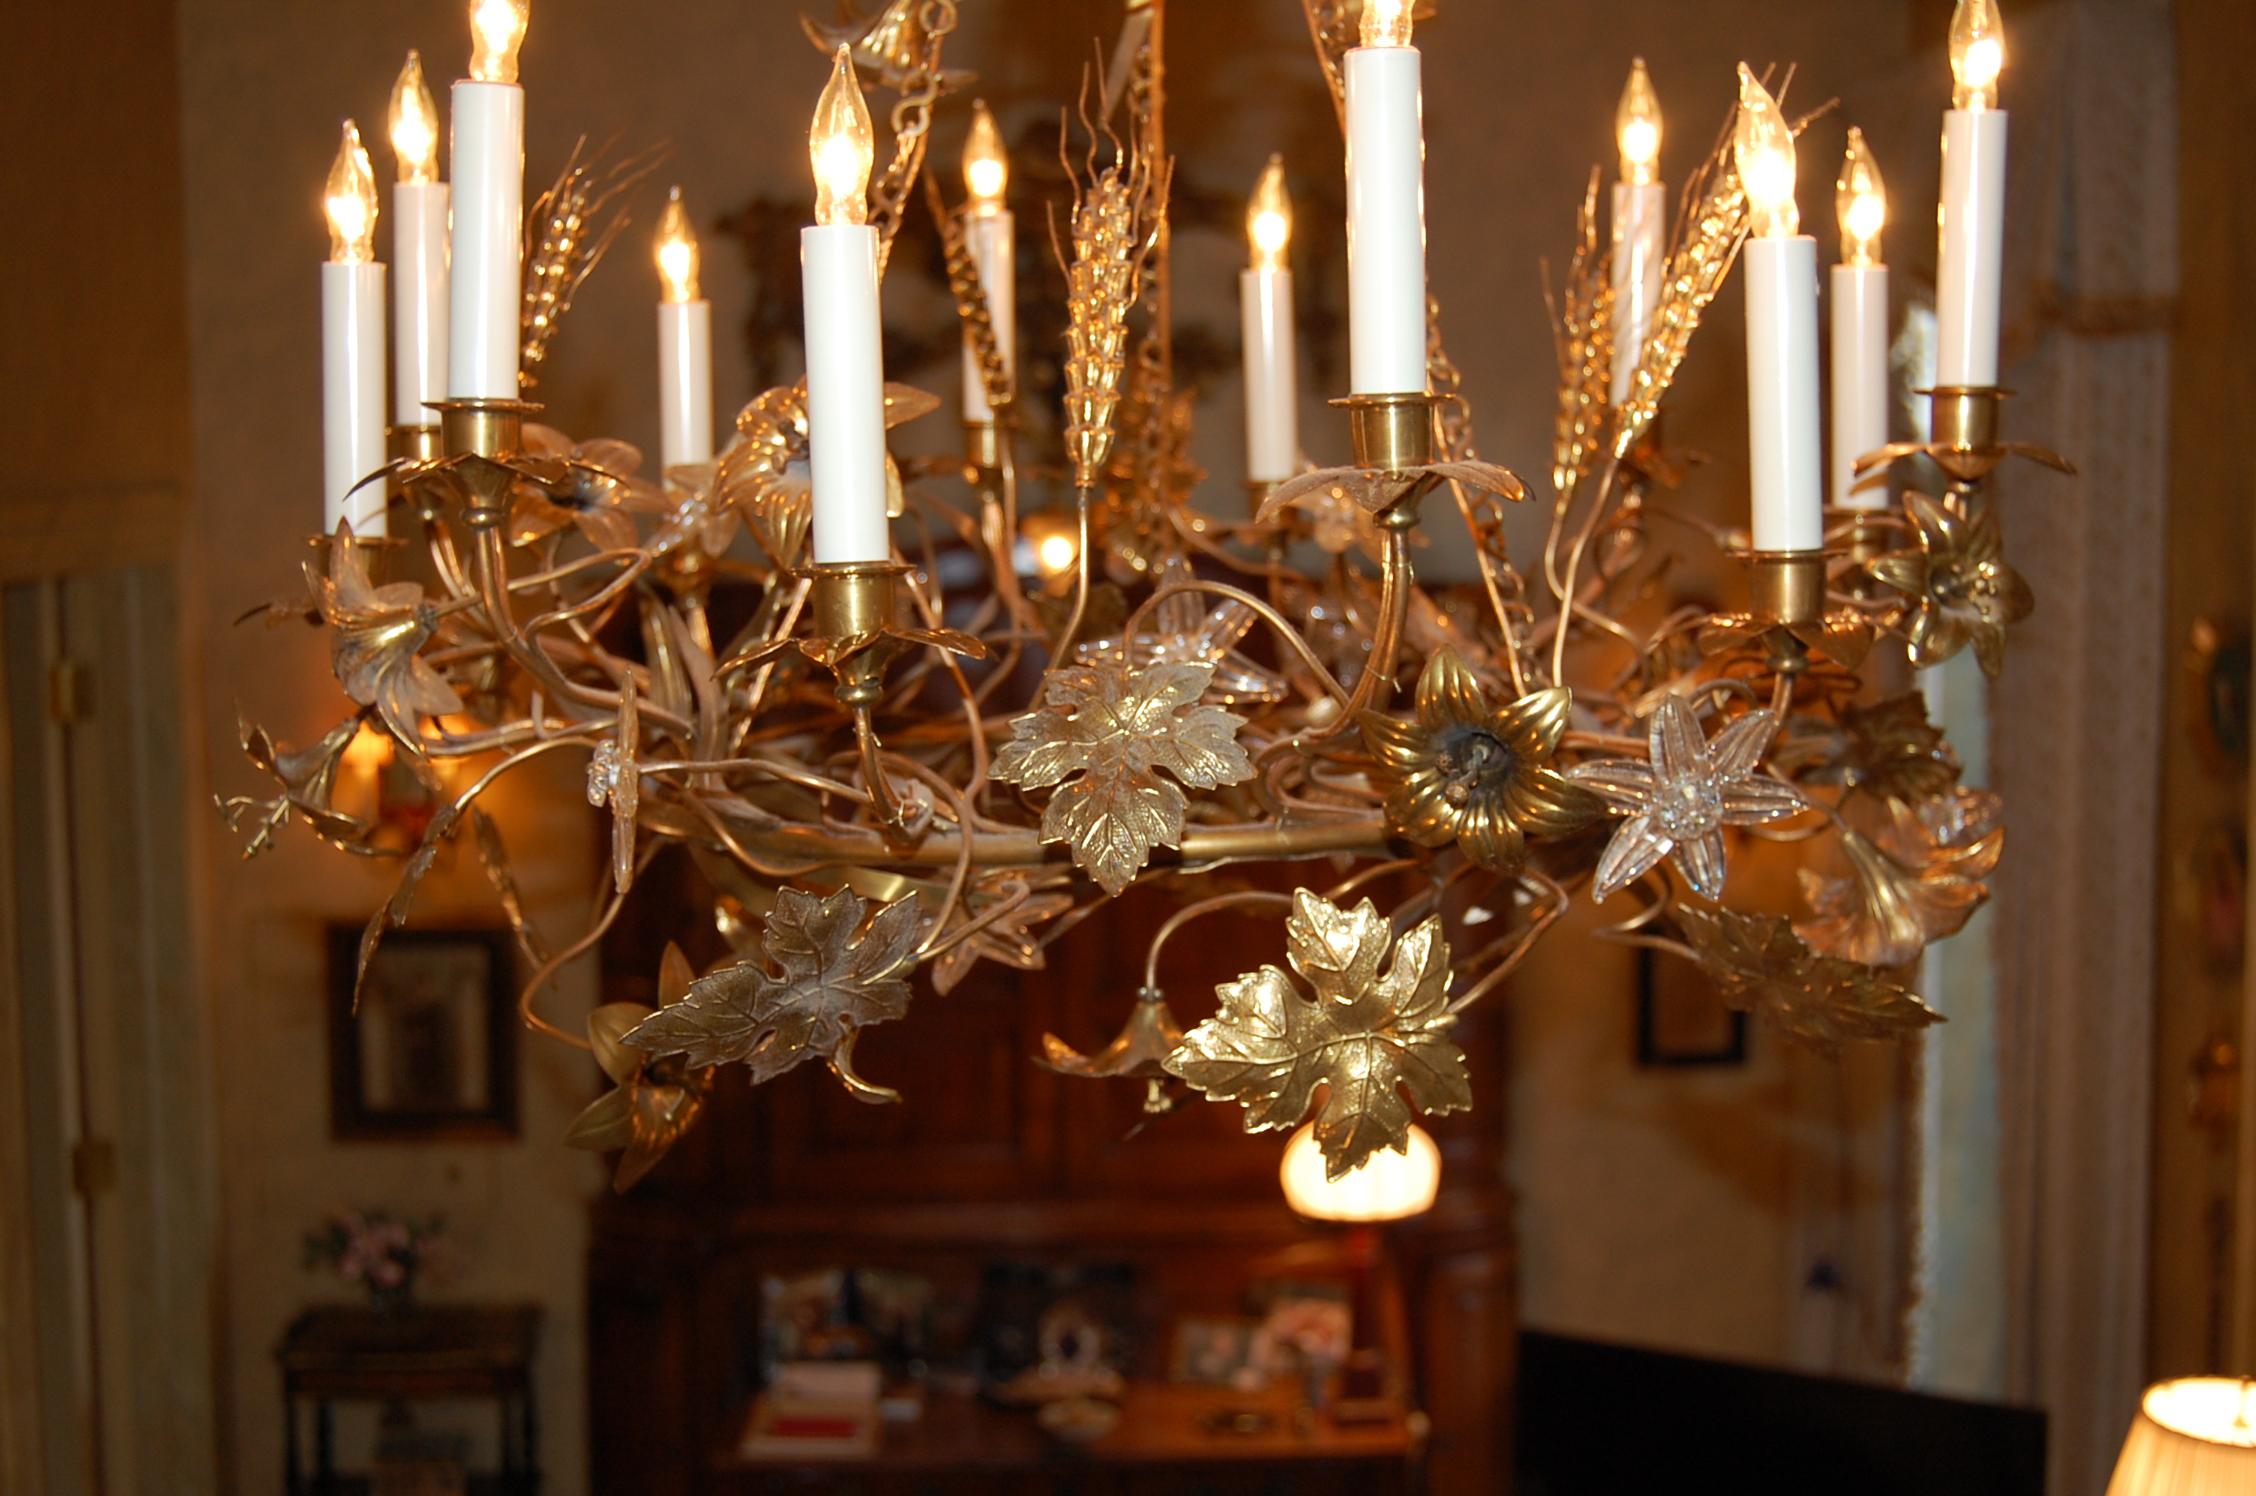 Gilt Brass Chandelier with Clusters of Brass Grapes, Leaves and Sheaths of Wheat 1